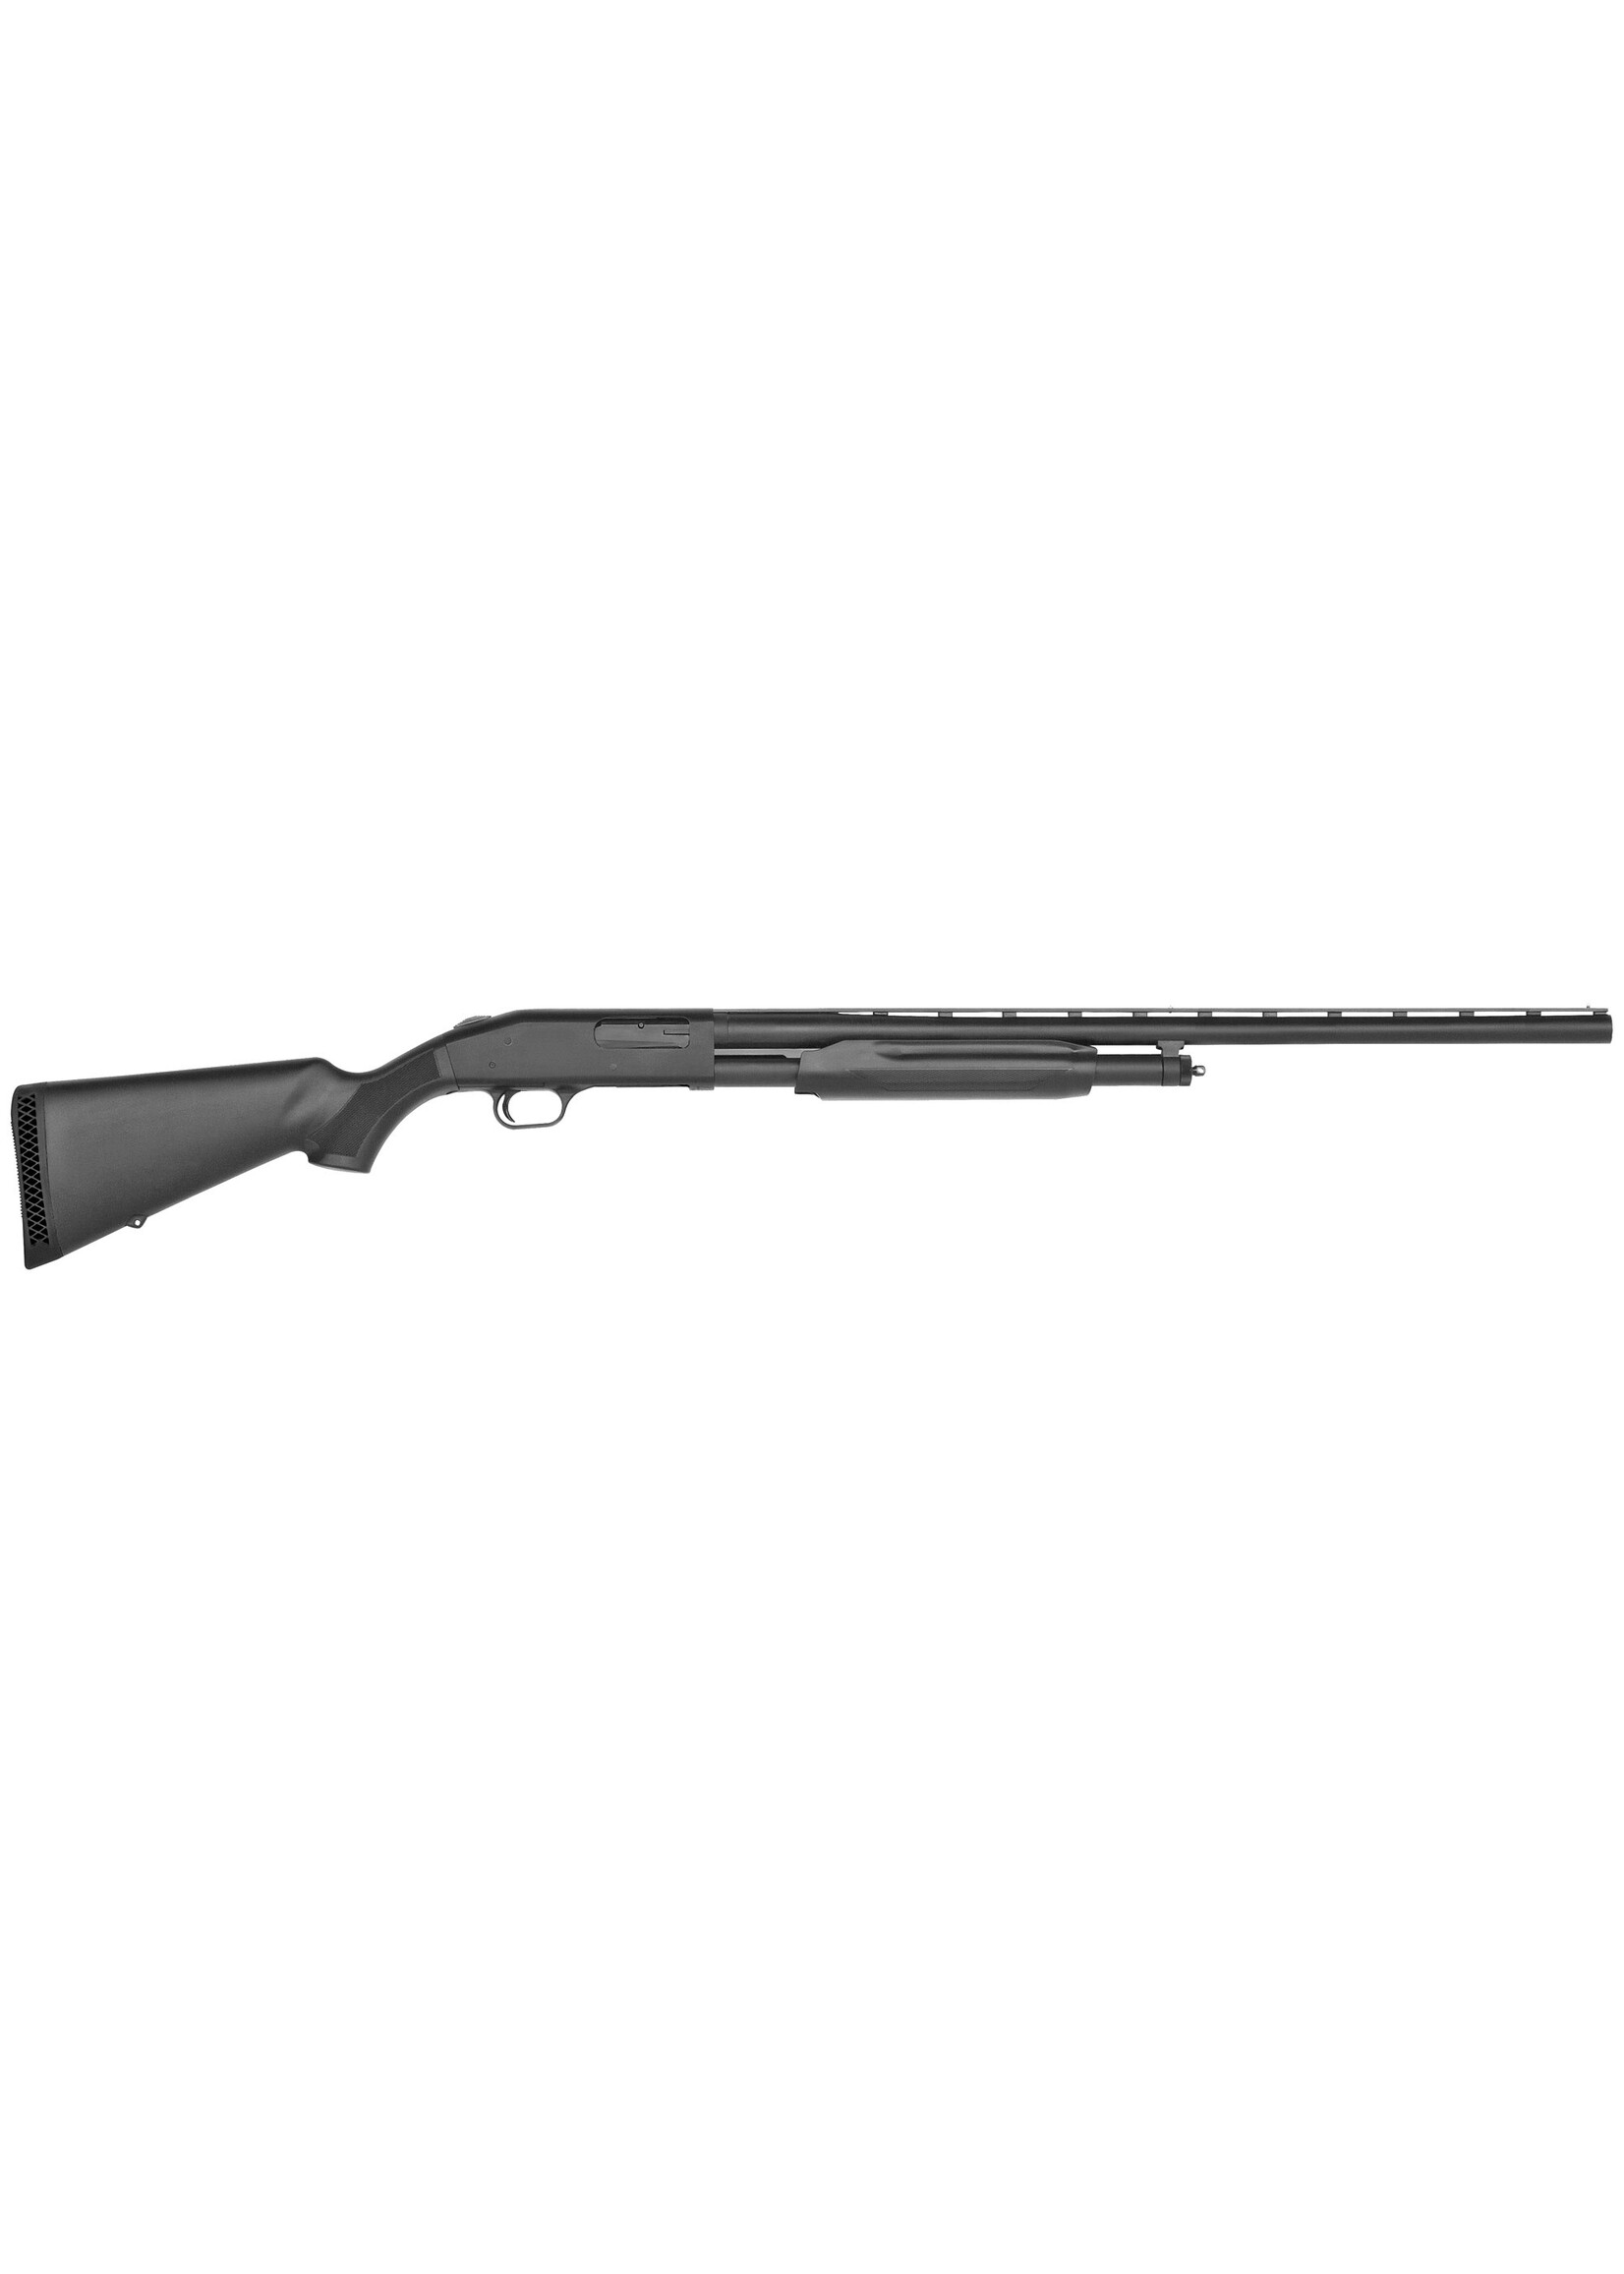 Mossberg Mossberg 56420 500 All Purpose Field 12 Gauge 5+1 3" 28" Vent Rib Barrel, Matte Blued Metal Finish, Dual Extractors, Black Synthetic Stock, Ambidextrous Safety, Includes Accu-Set Chokes